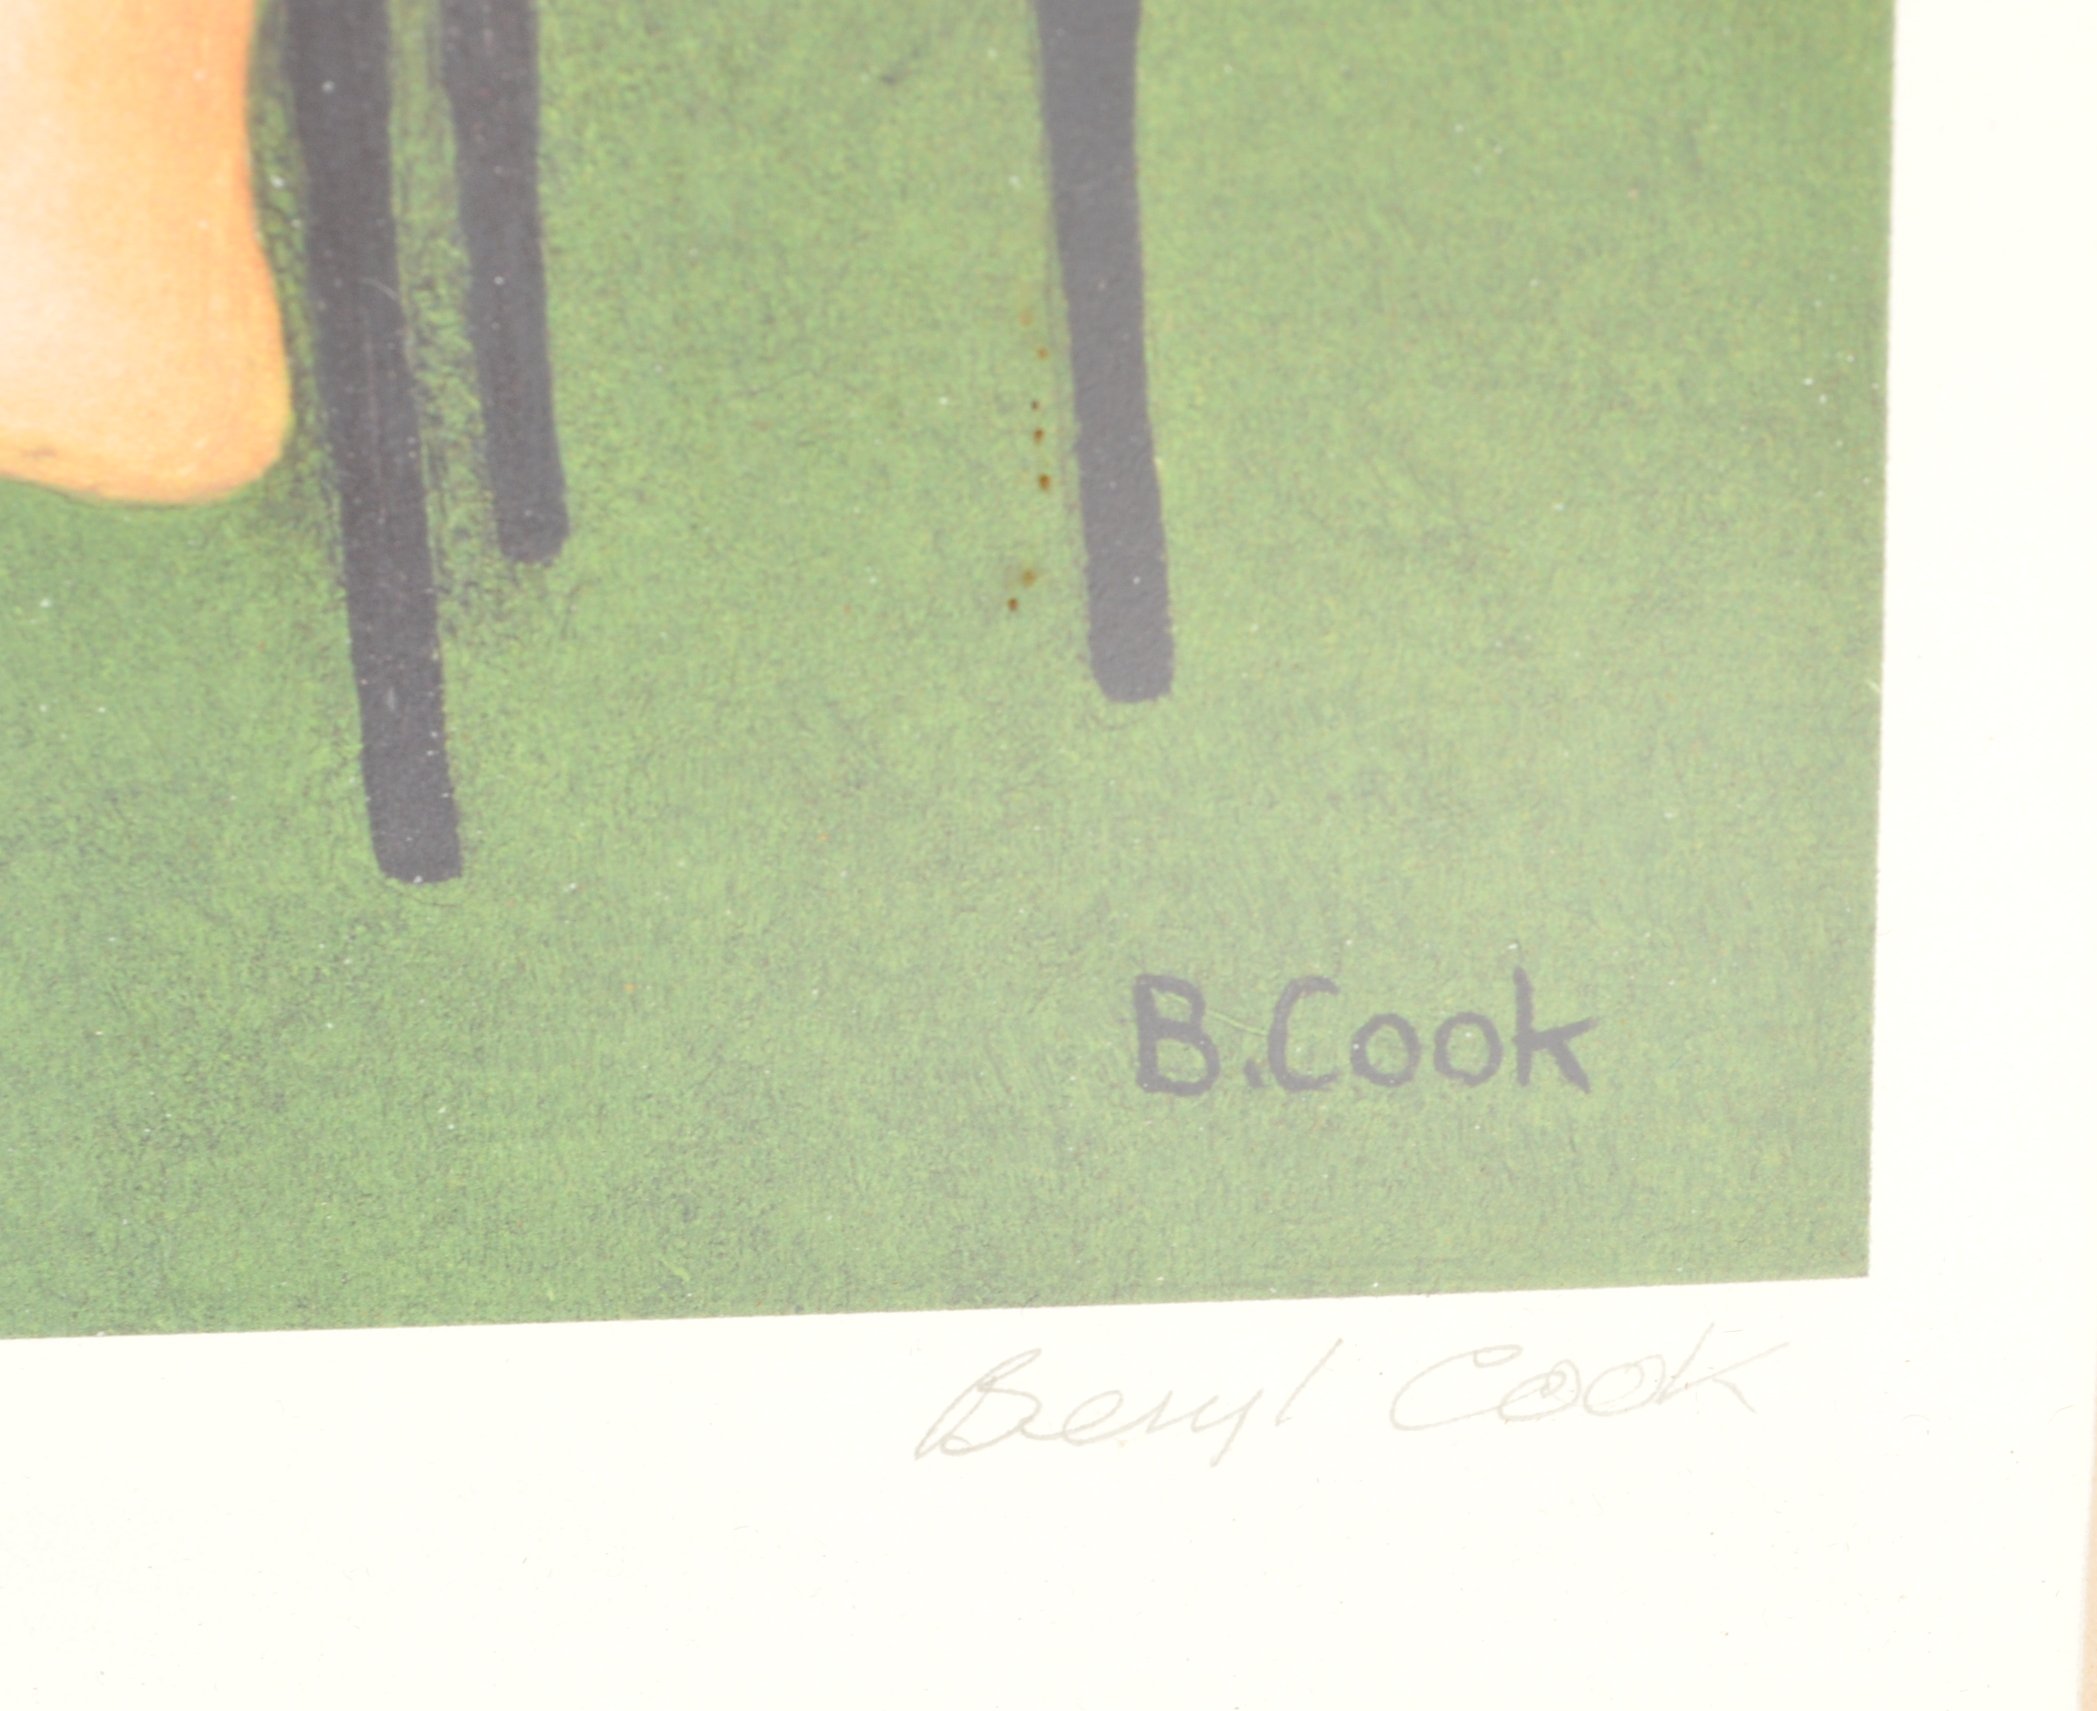 BERYL COOK - TEA IN THE GARDEN - FRAMED LITHOGRAPHIC PRINT - Image 3 of 5